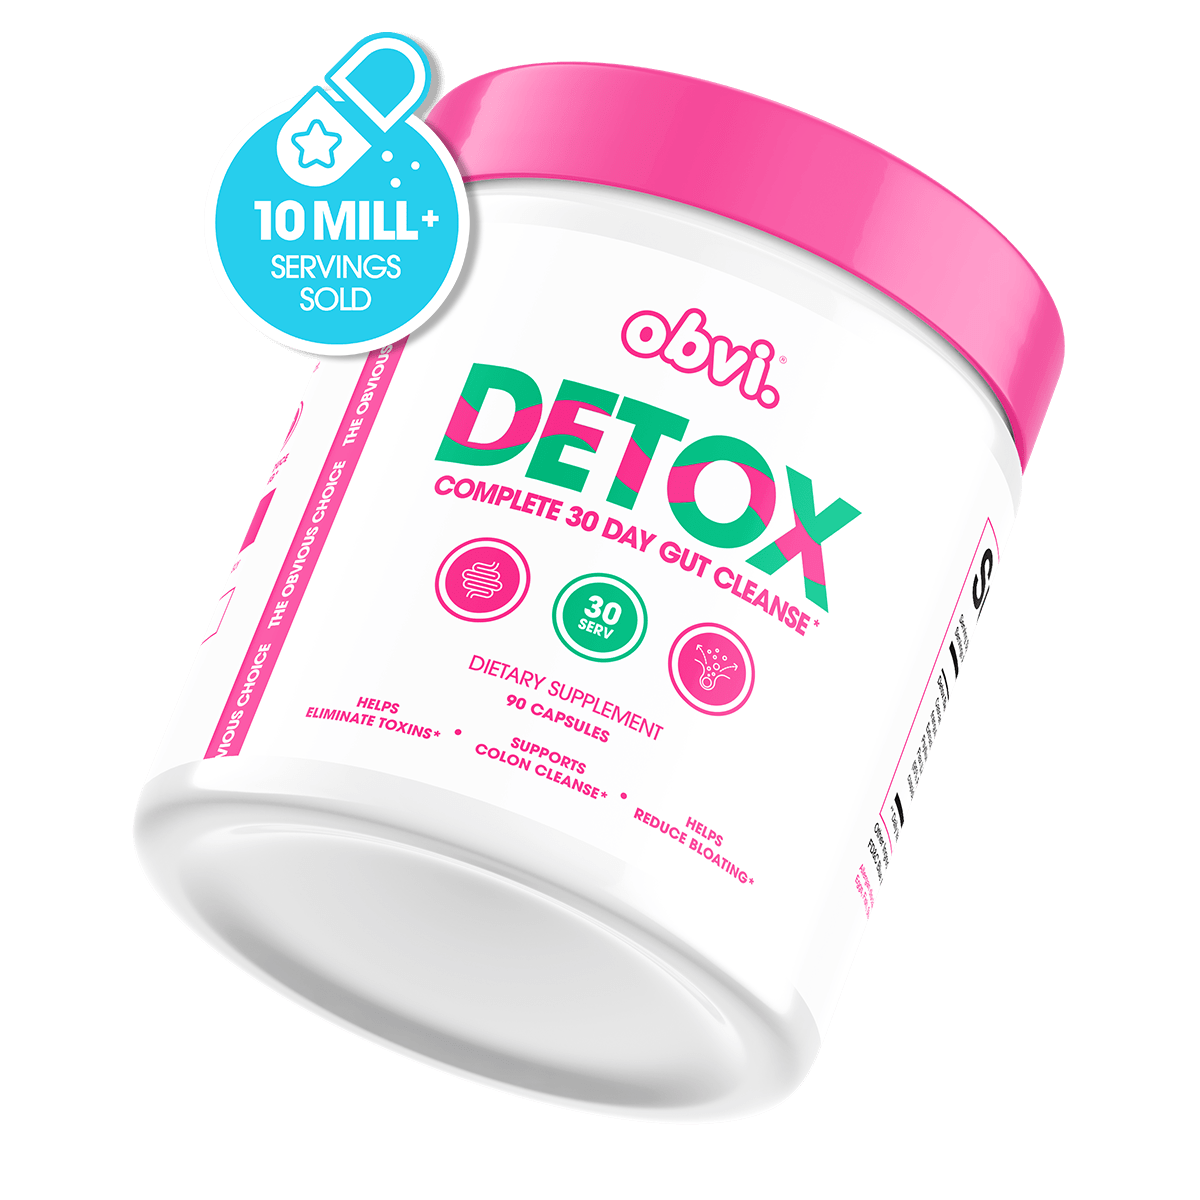 Colon Cleanse Detox Pills: Supplements For Bloating | Obvi